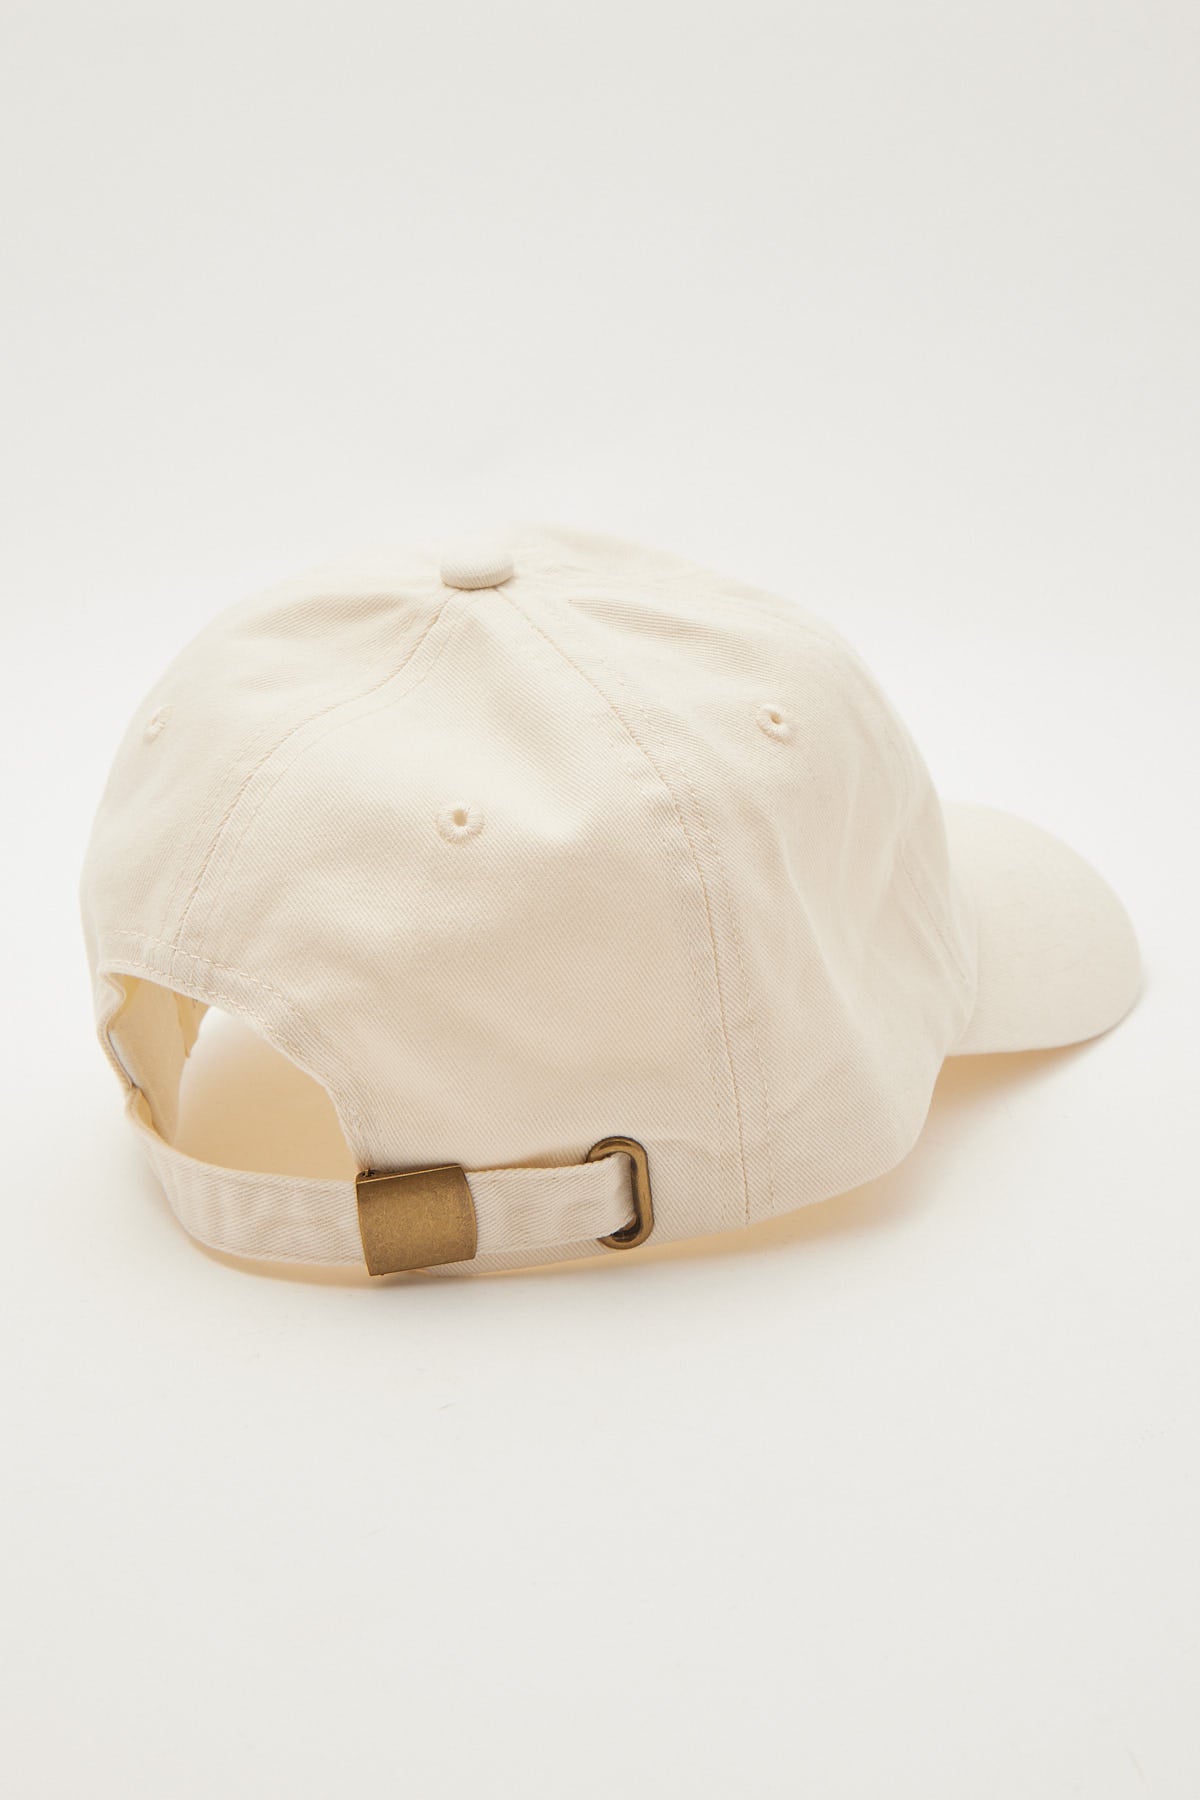 Common Need Capital Dad Cap Off White